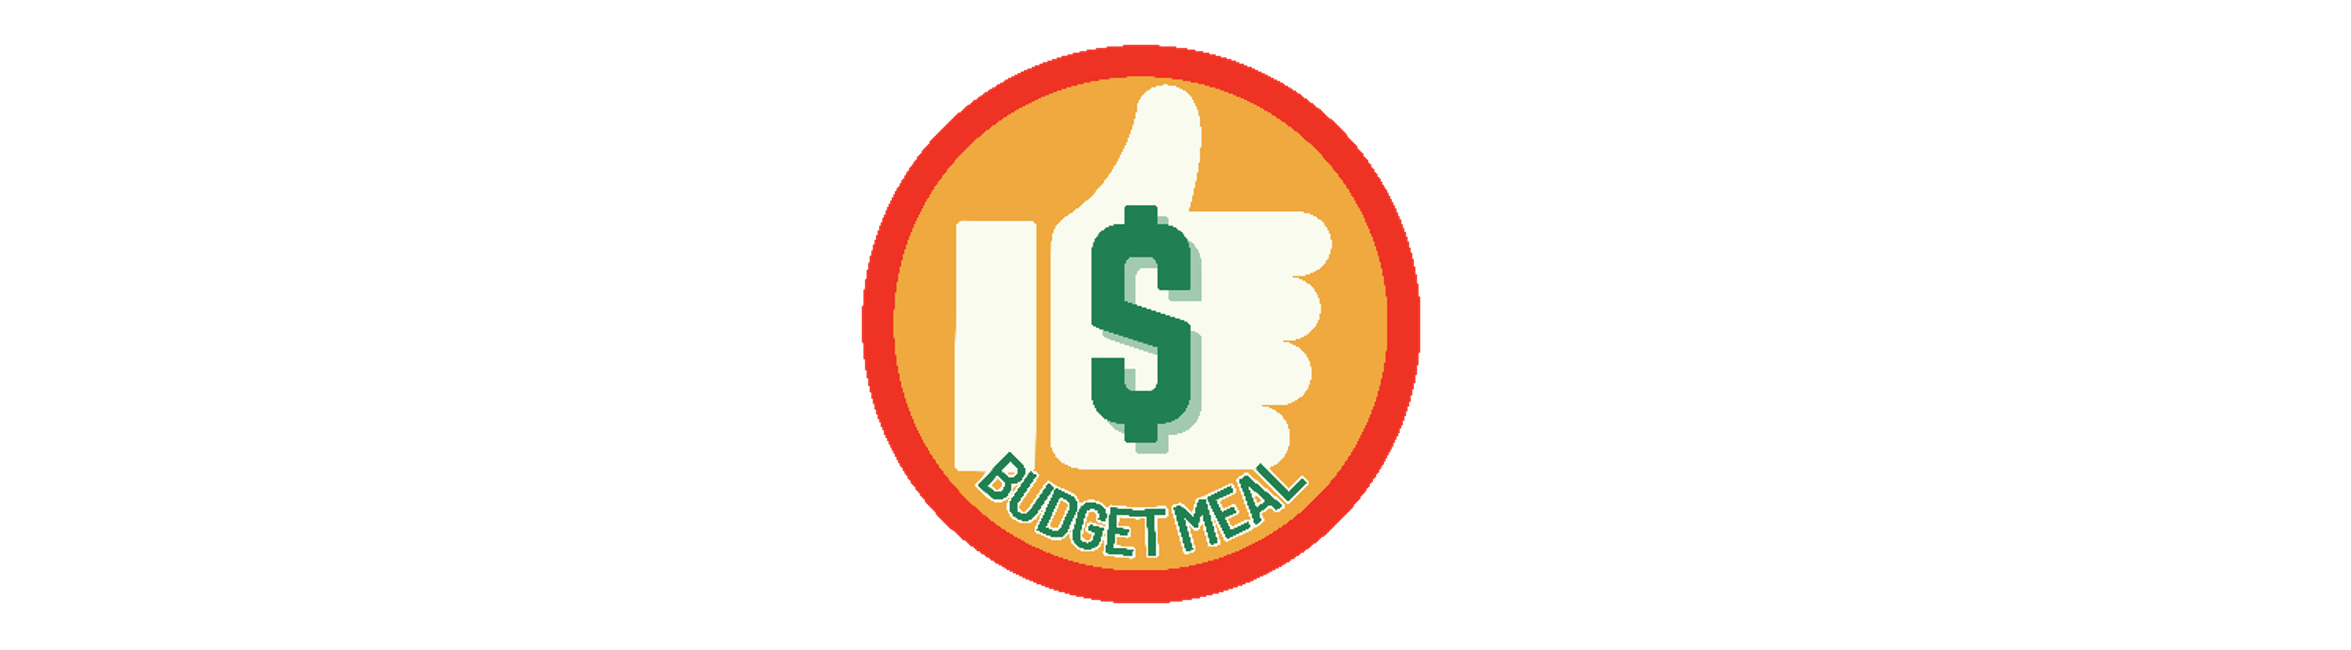 Budget meal decal provided at HDB coffee shops